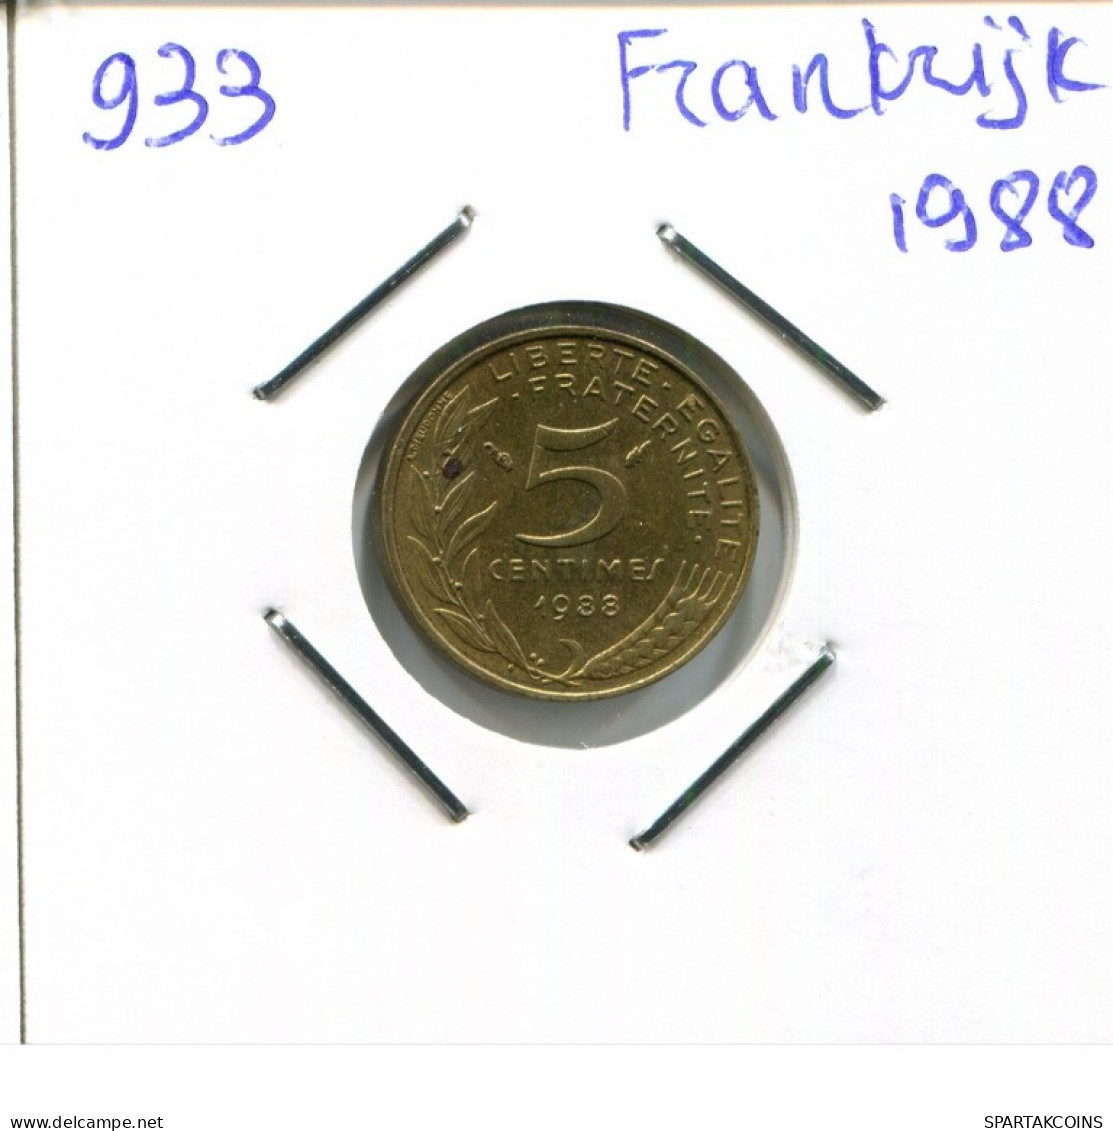 5 CENTIMES 1988 FRANCE Coin French Coin #AN030.U.A - 5 Centimes